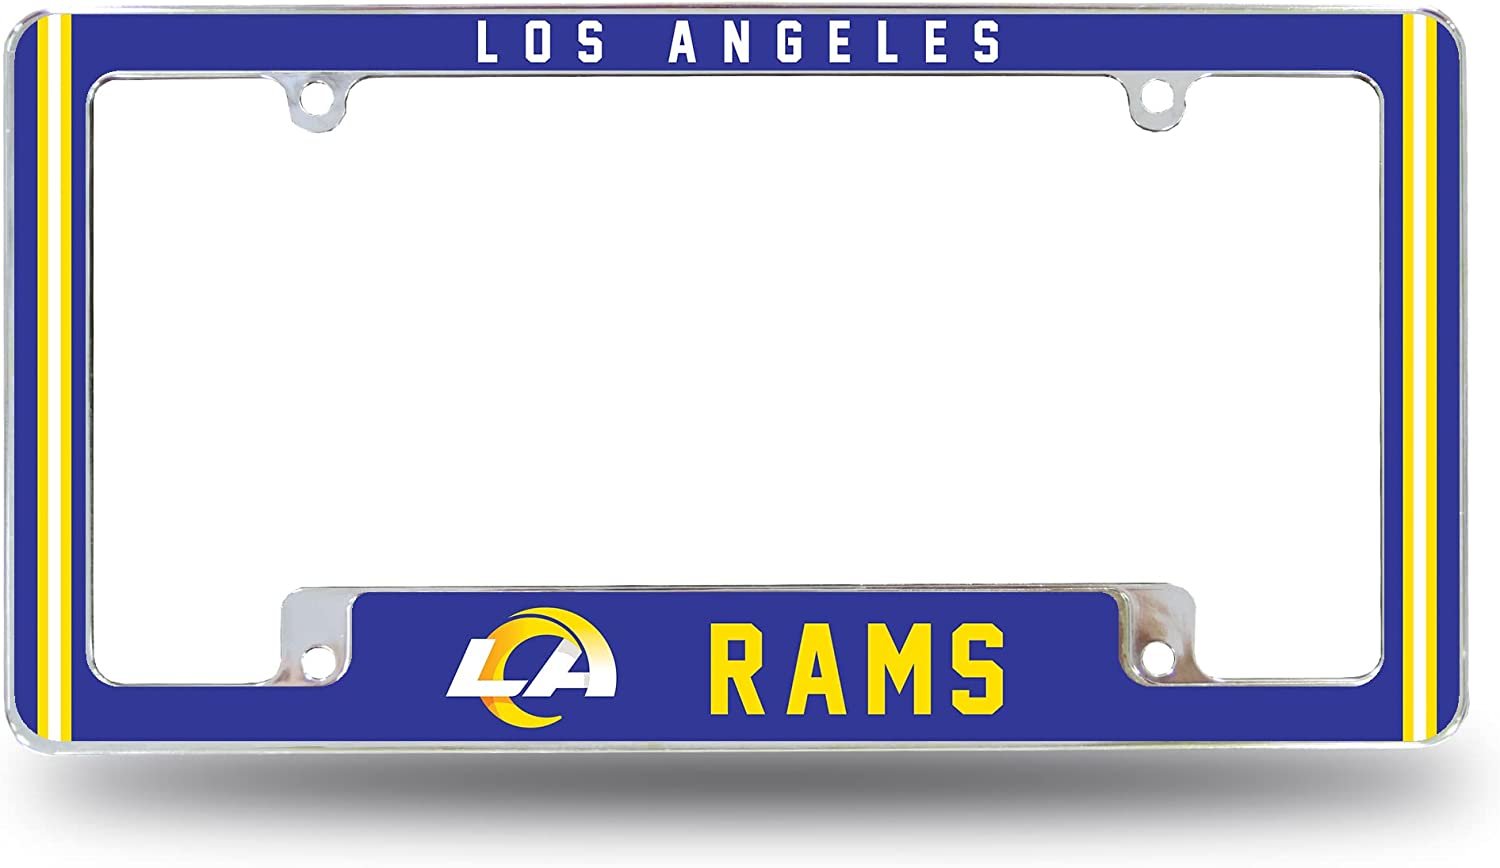 Los Angeles Rams Metal License Plate Frame Chrome Tag Cover Alternate Design 6x12 Inch